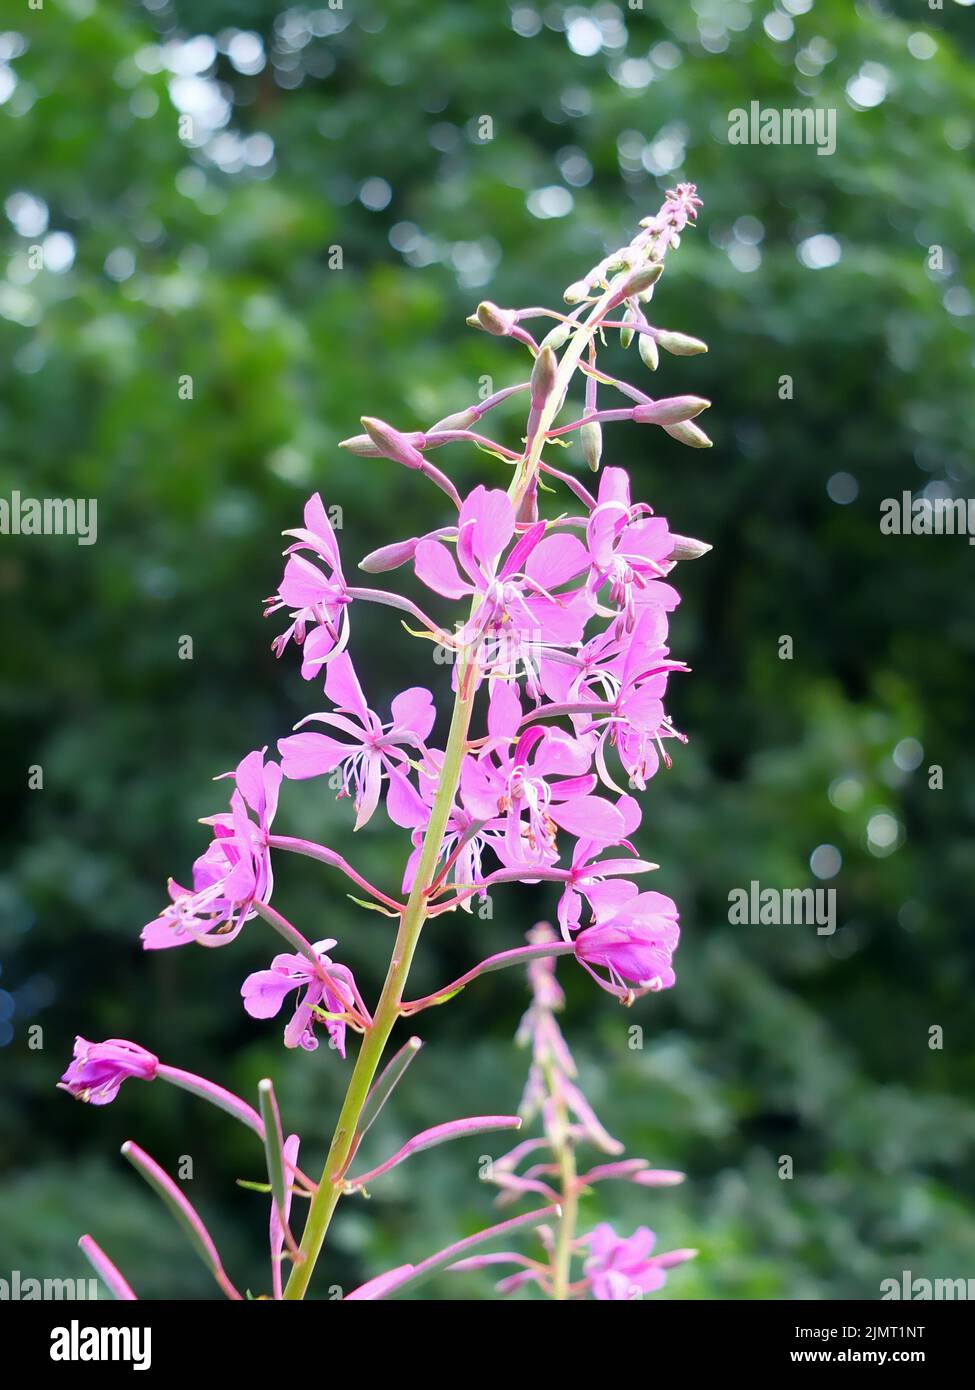 Close up of a flowering pink willowherb plant also known as fireweed with a blurred green background Stock Photo